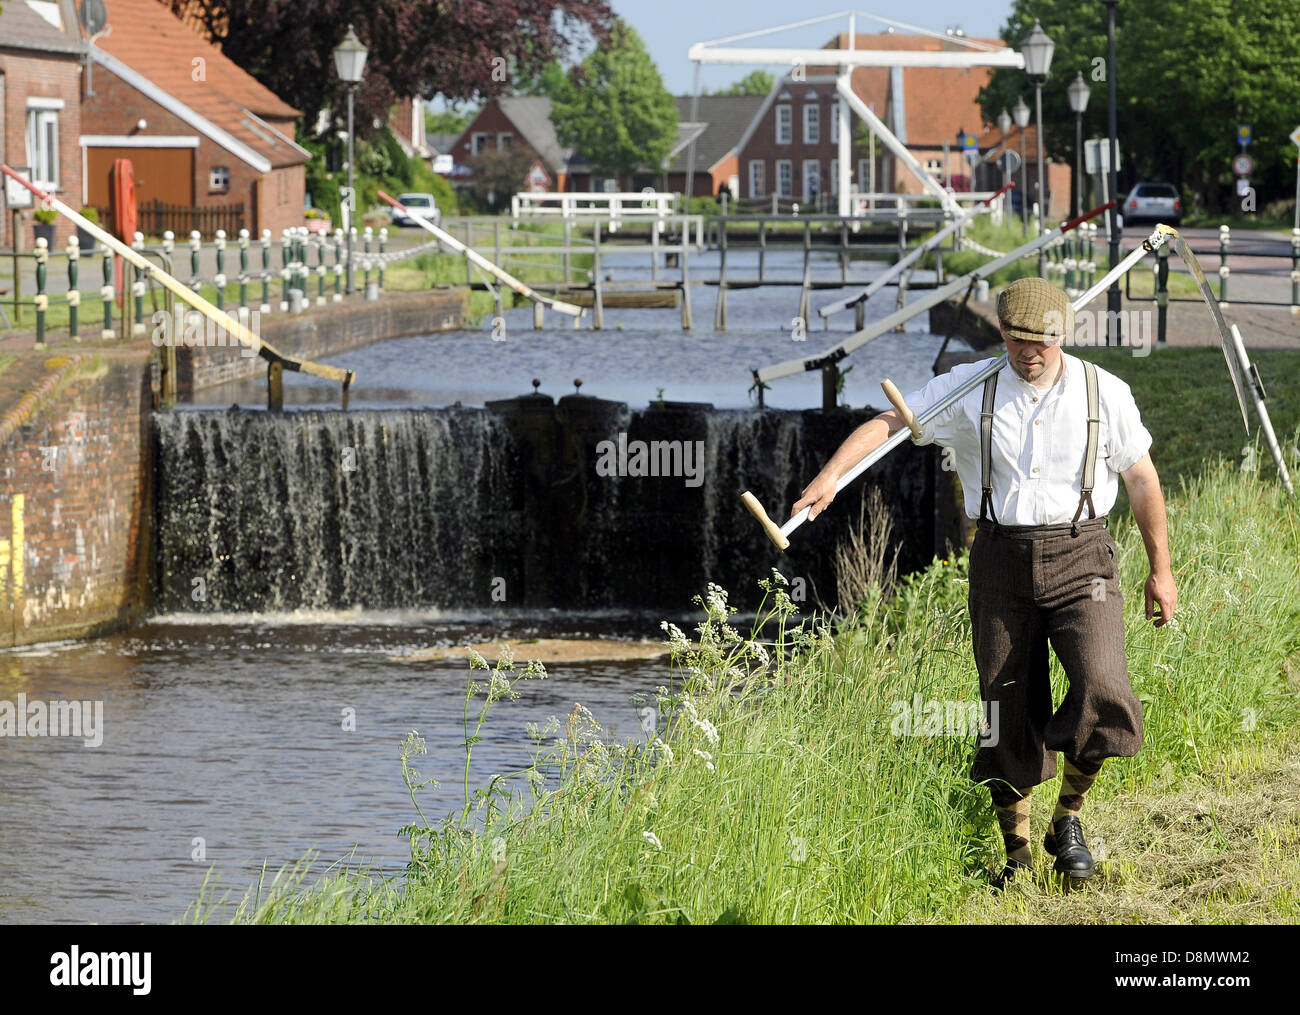 Thomas Balzen from the Fehn Museum dressed in historic clothing mows the grass in the Fehn Canal outside of the museum in Westgrossfehn, Germany, 31 May 2013. The height difference between a 17th century built channel and the natural waterway can be seen in the background. This drop was used to drive a sawmill in the past. Photo: INGO WAGNER Stock Photo